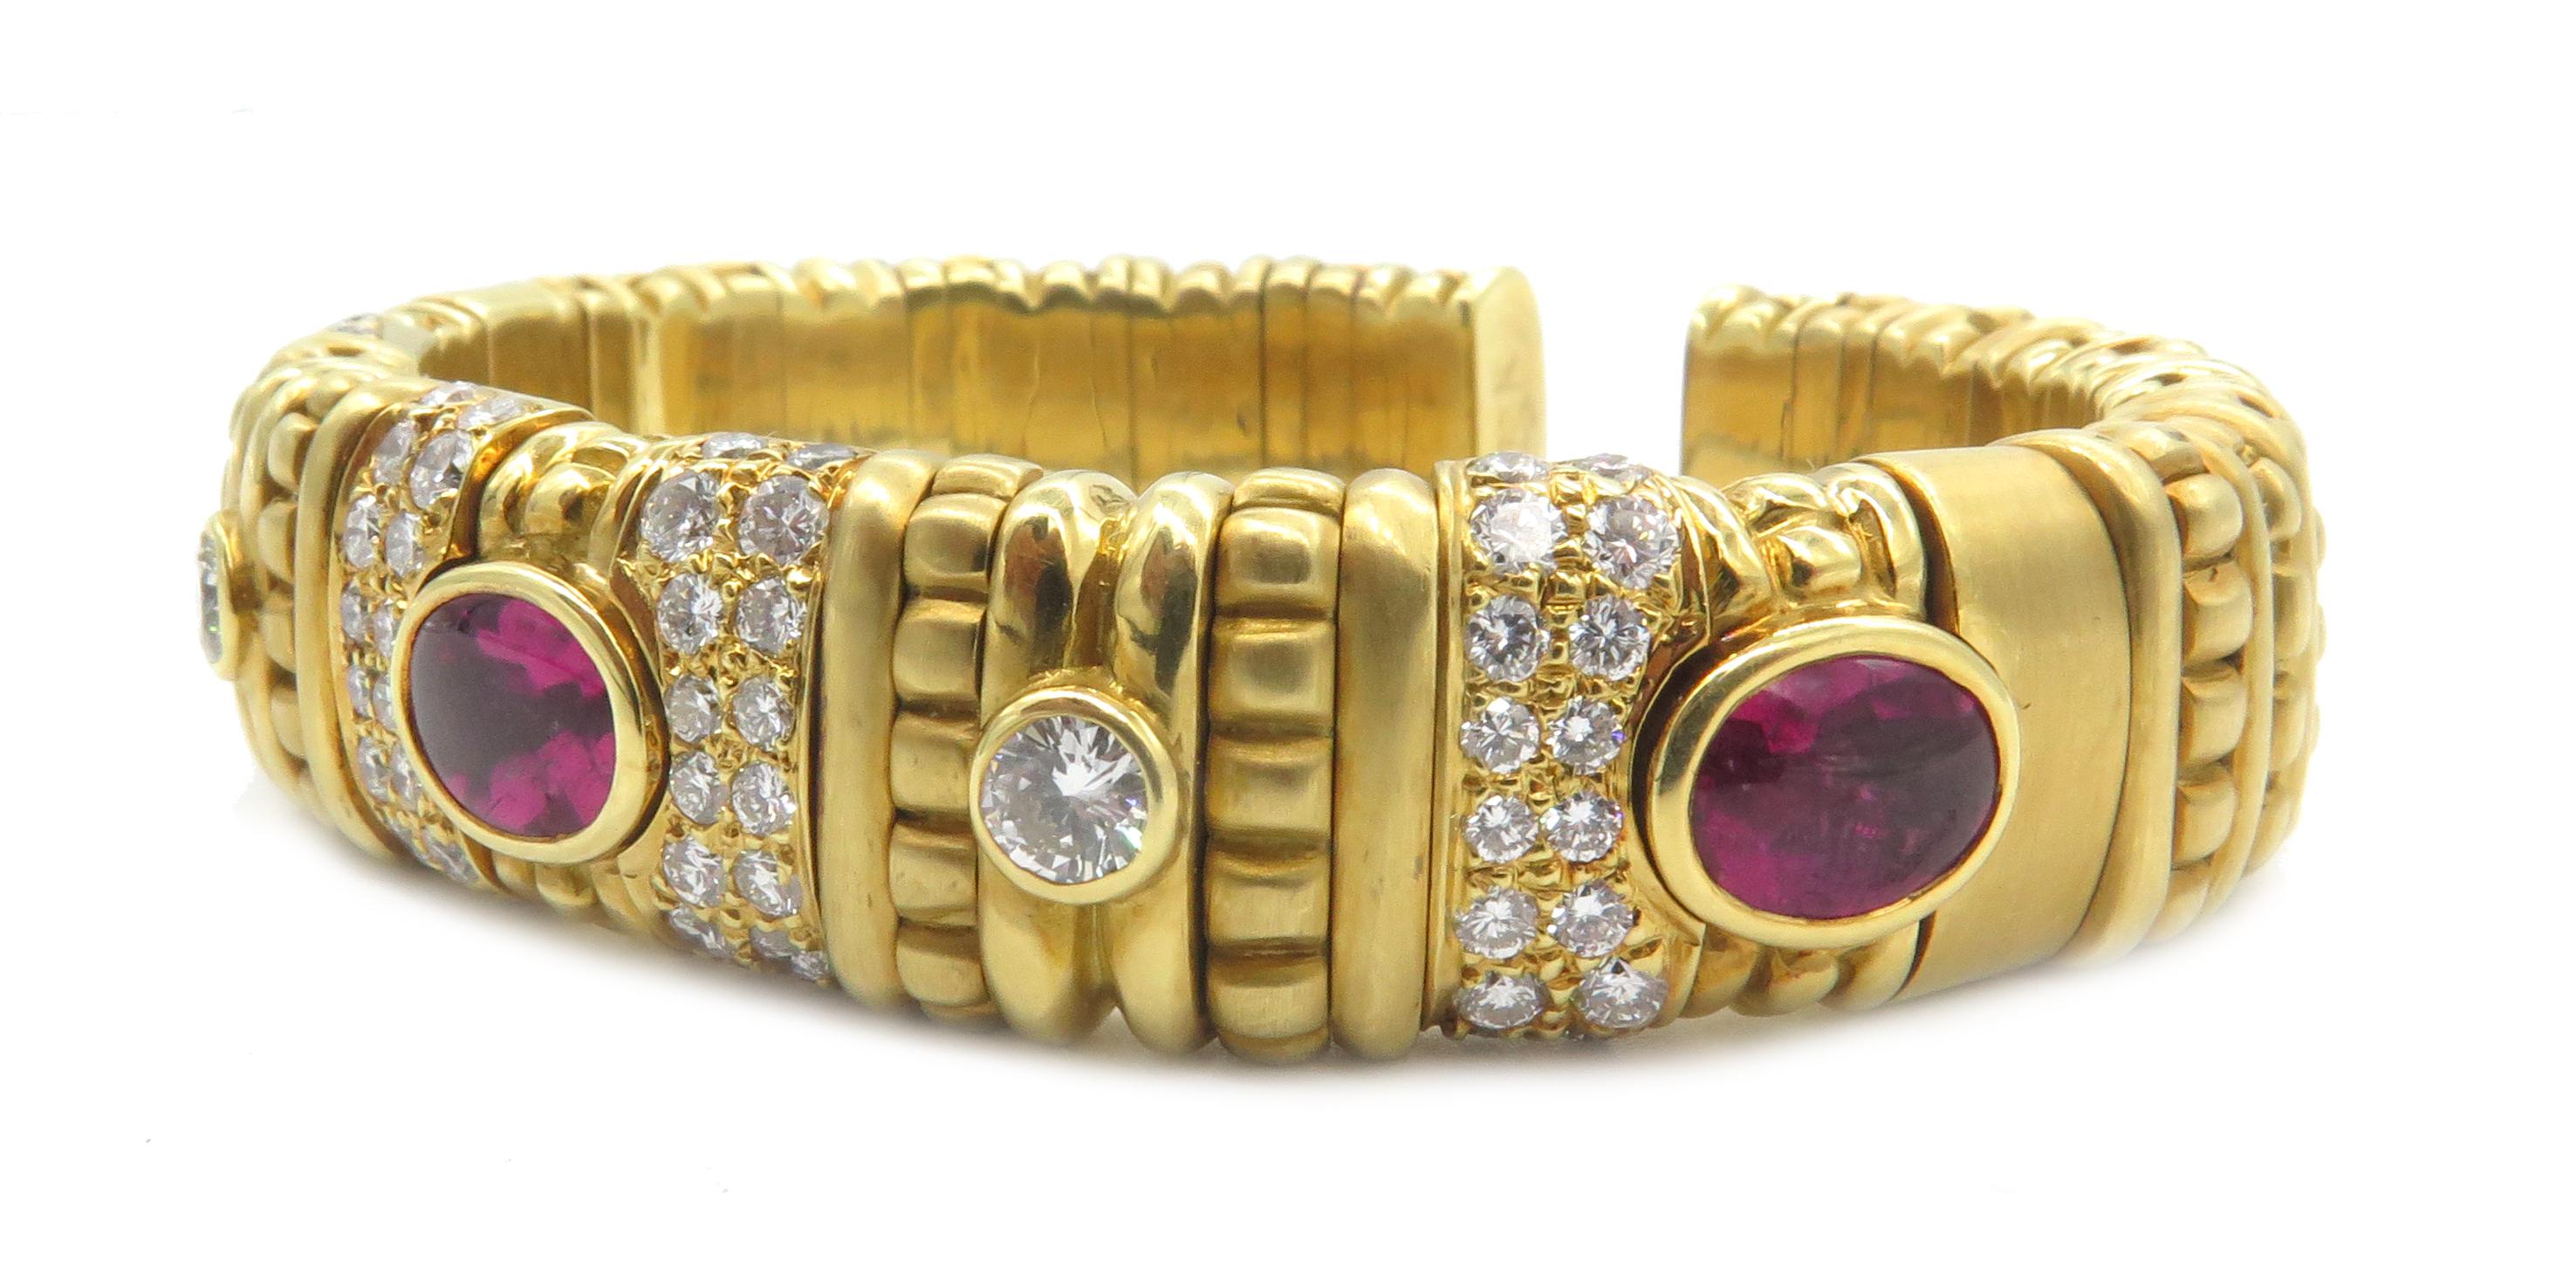 18 Karat Yellow Gold Diamond and Rubelite Bracelet In Excellent Condition For Sale In West Palm Beach, FL